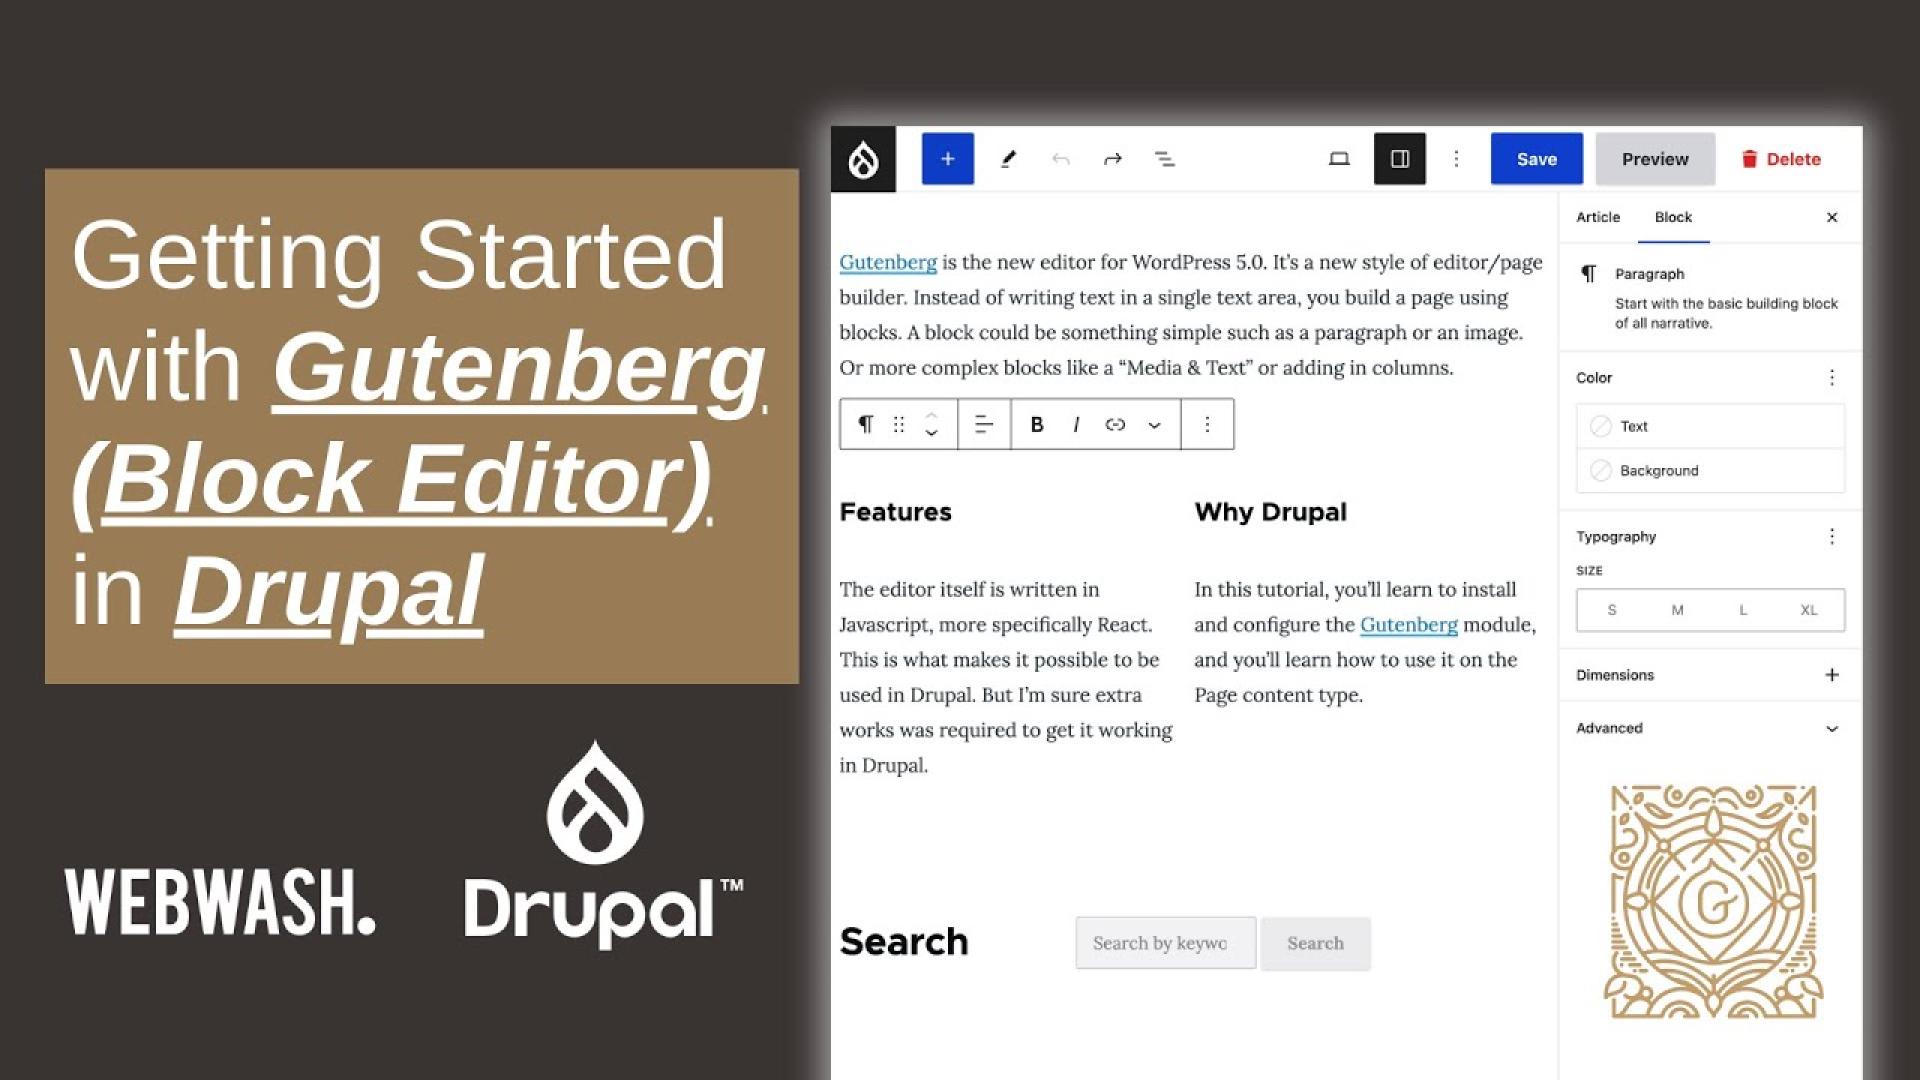 "Getting Started with Gutenberg (Block Editor) in Drupal"